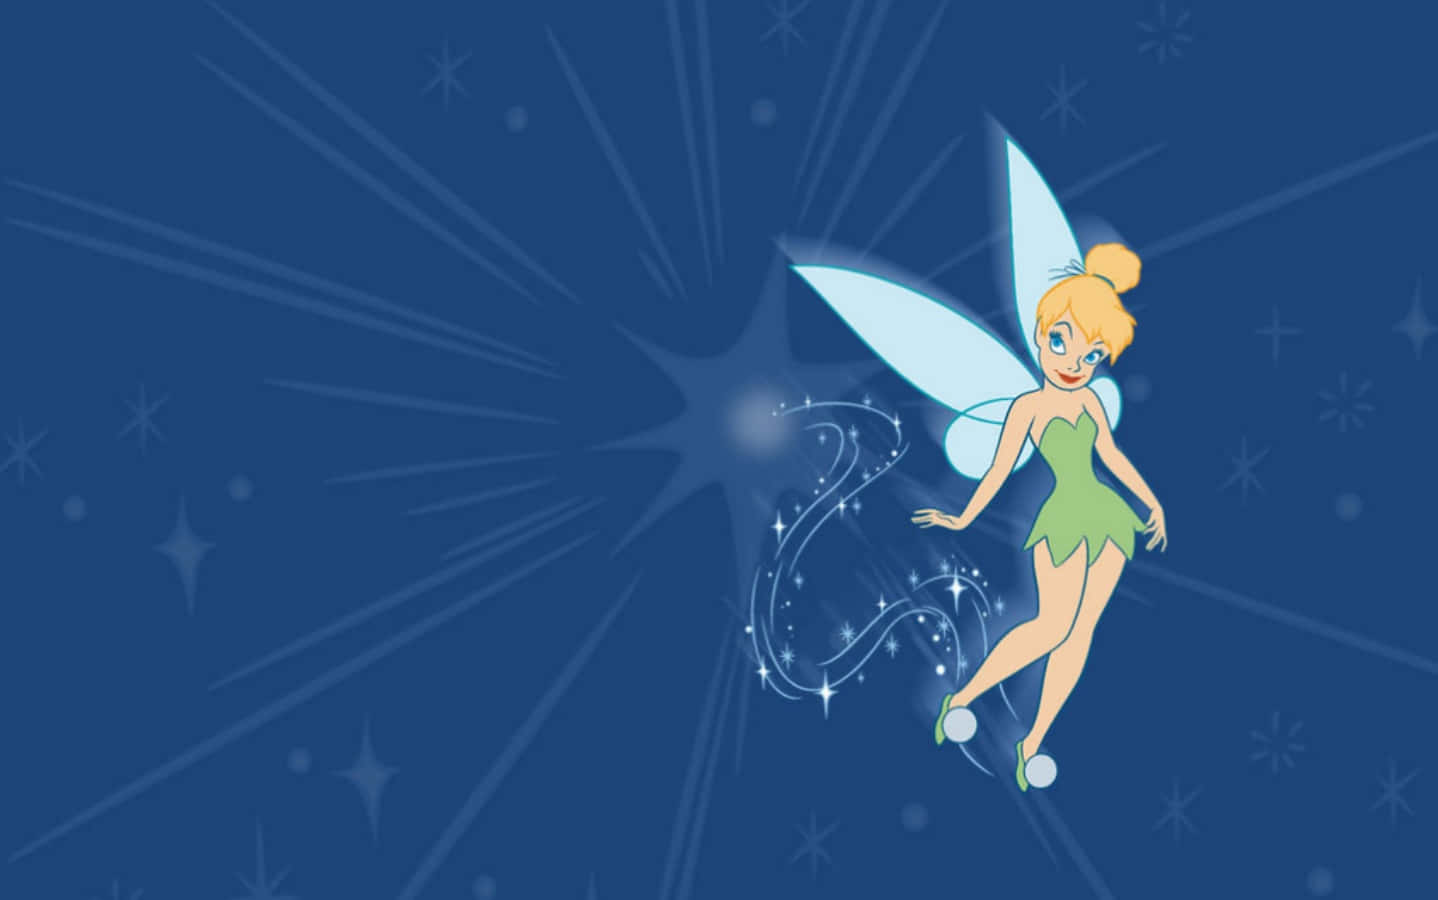 Tinkerbell flying around the stars